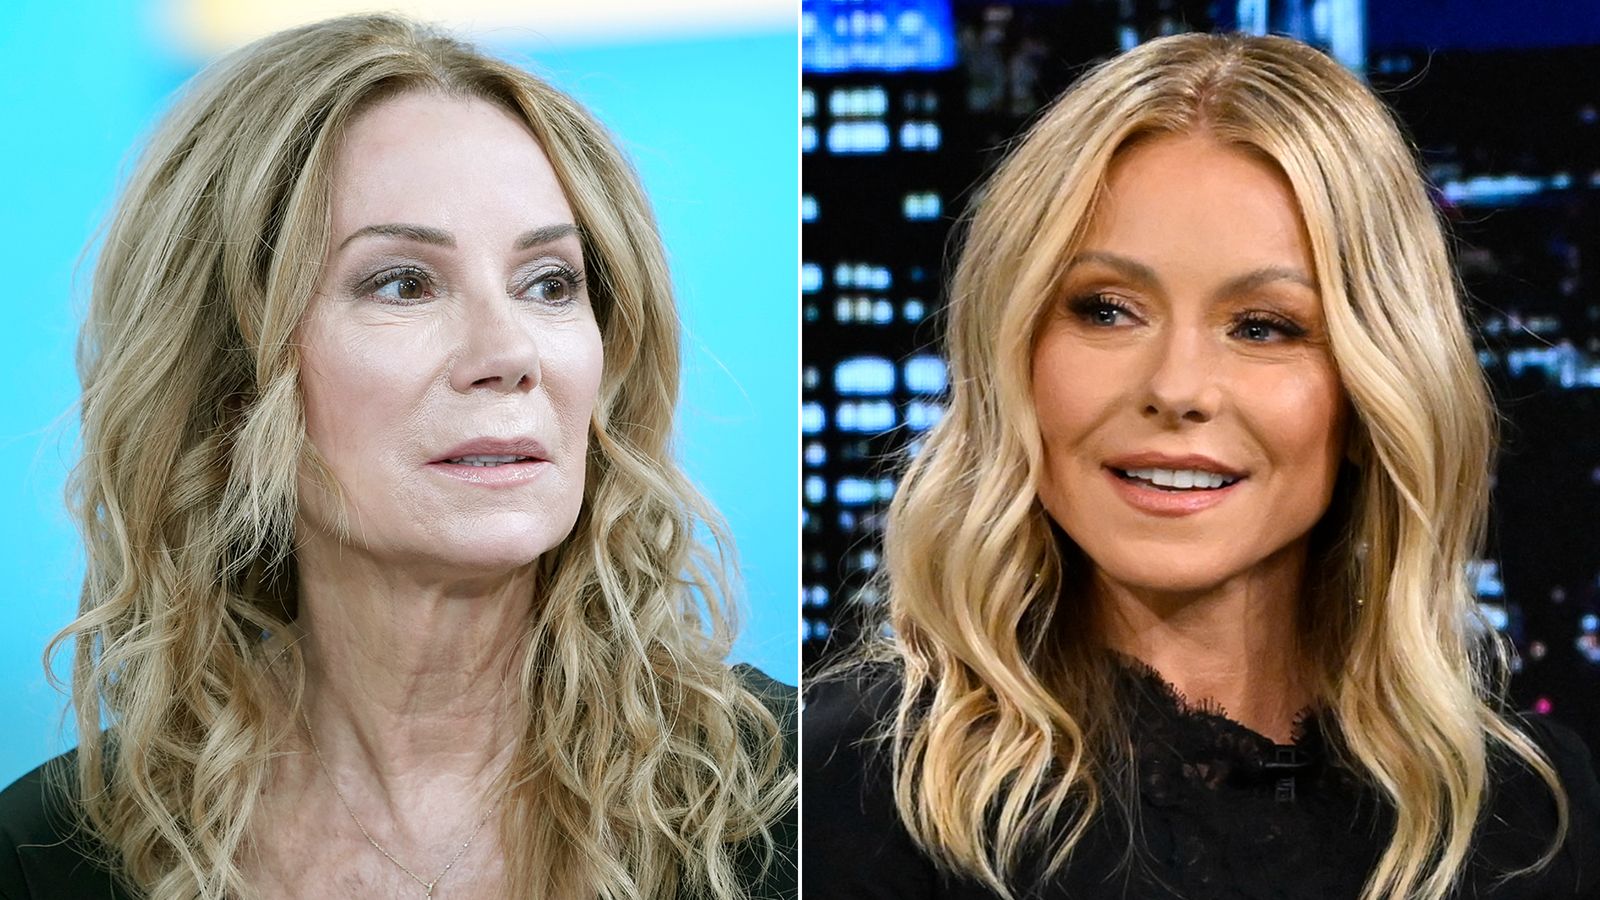 Kathie Lee Gifford doesn't plan to read Kelly Ripa's book | CNN